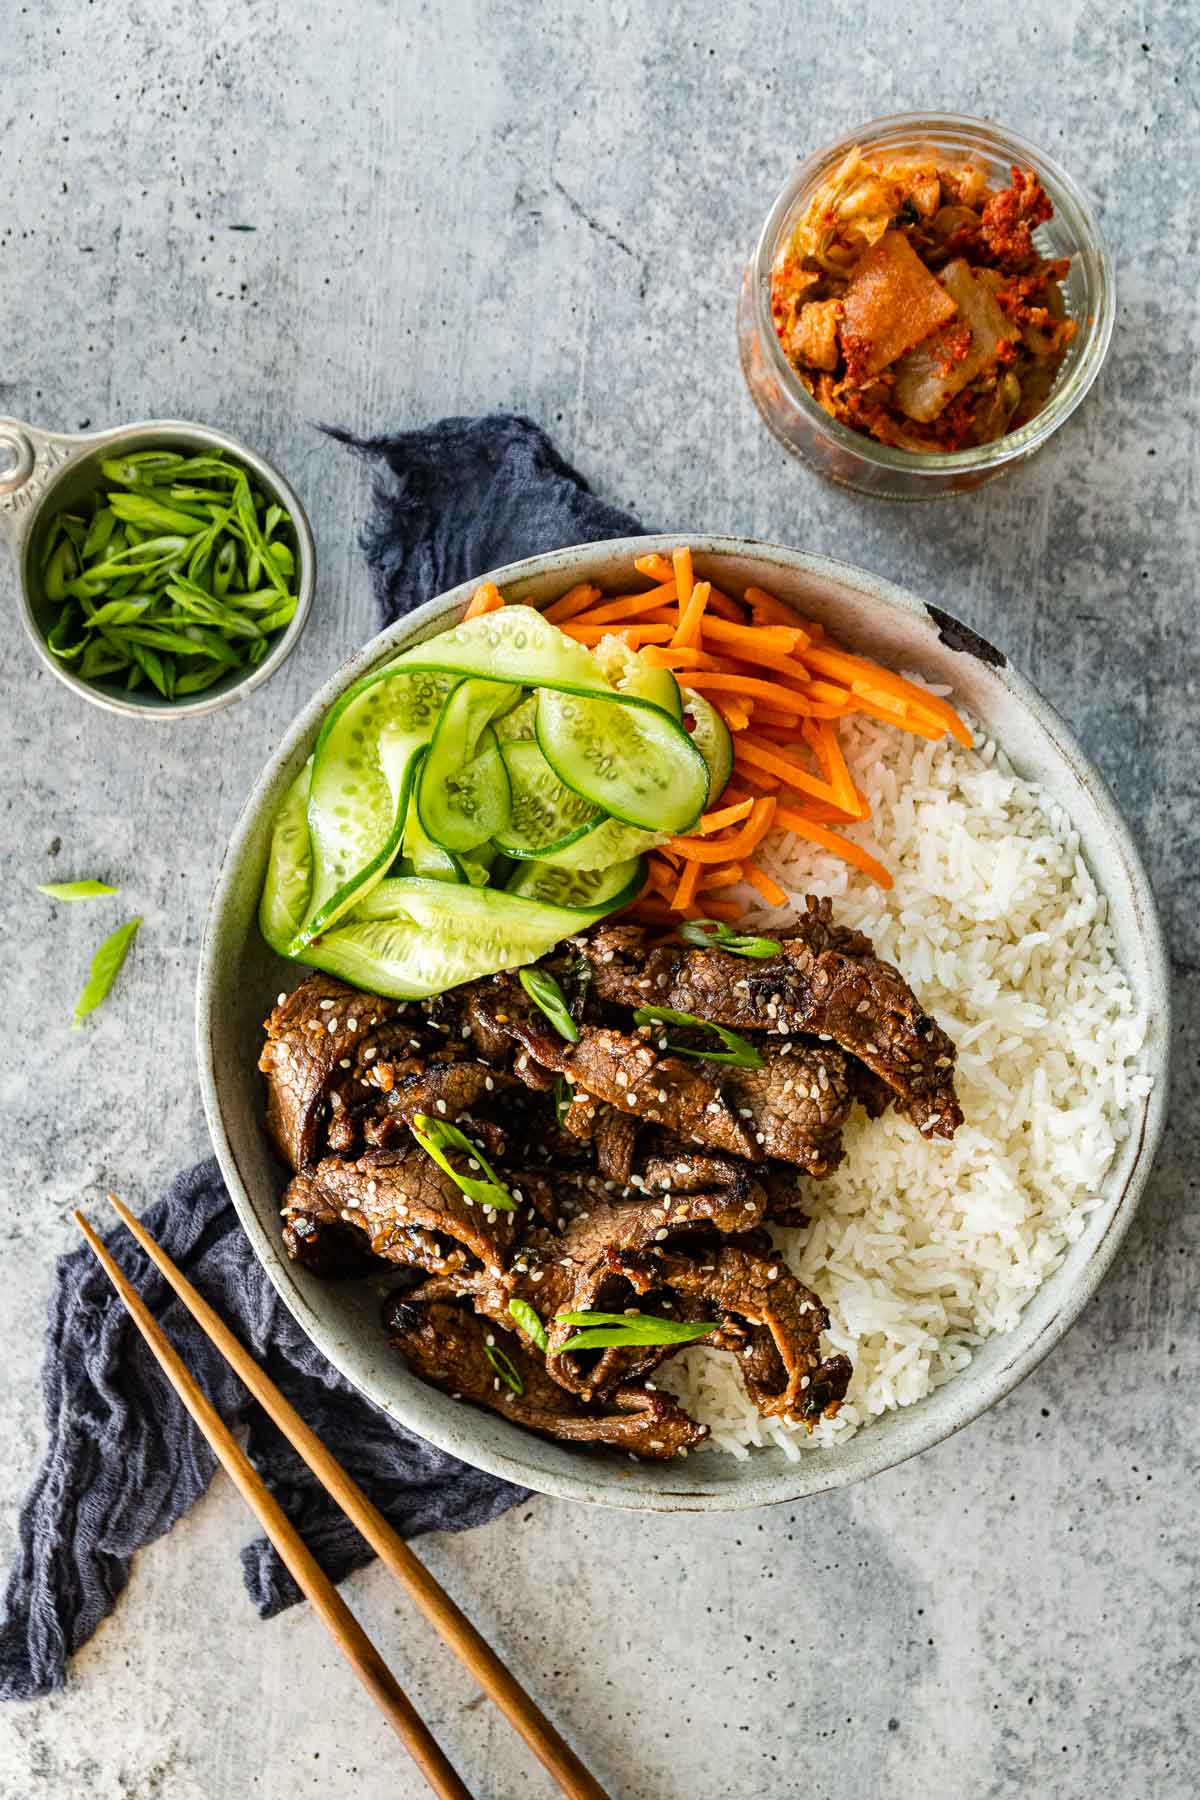 Korean Beef Bulgogi cooked beef slices in serving bowl with white rice, shredded carrots, and sliced cucumbers